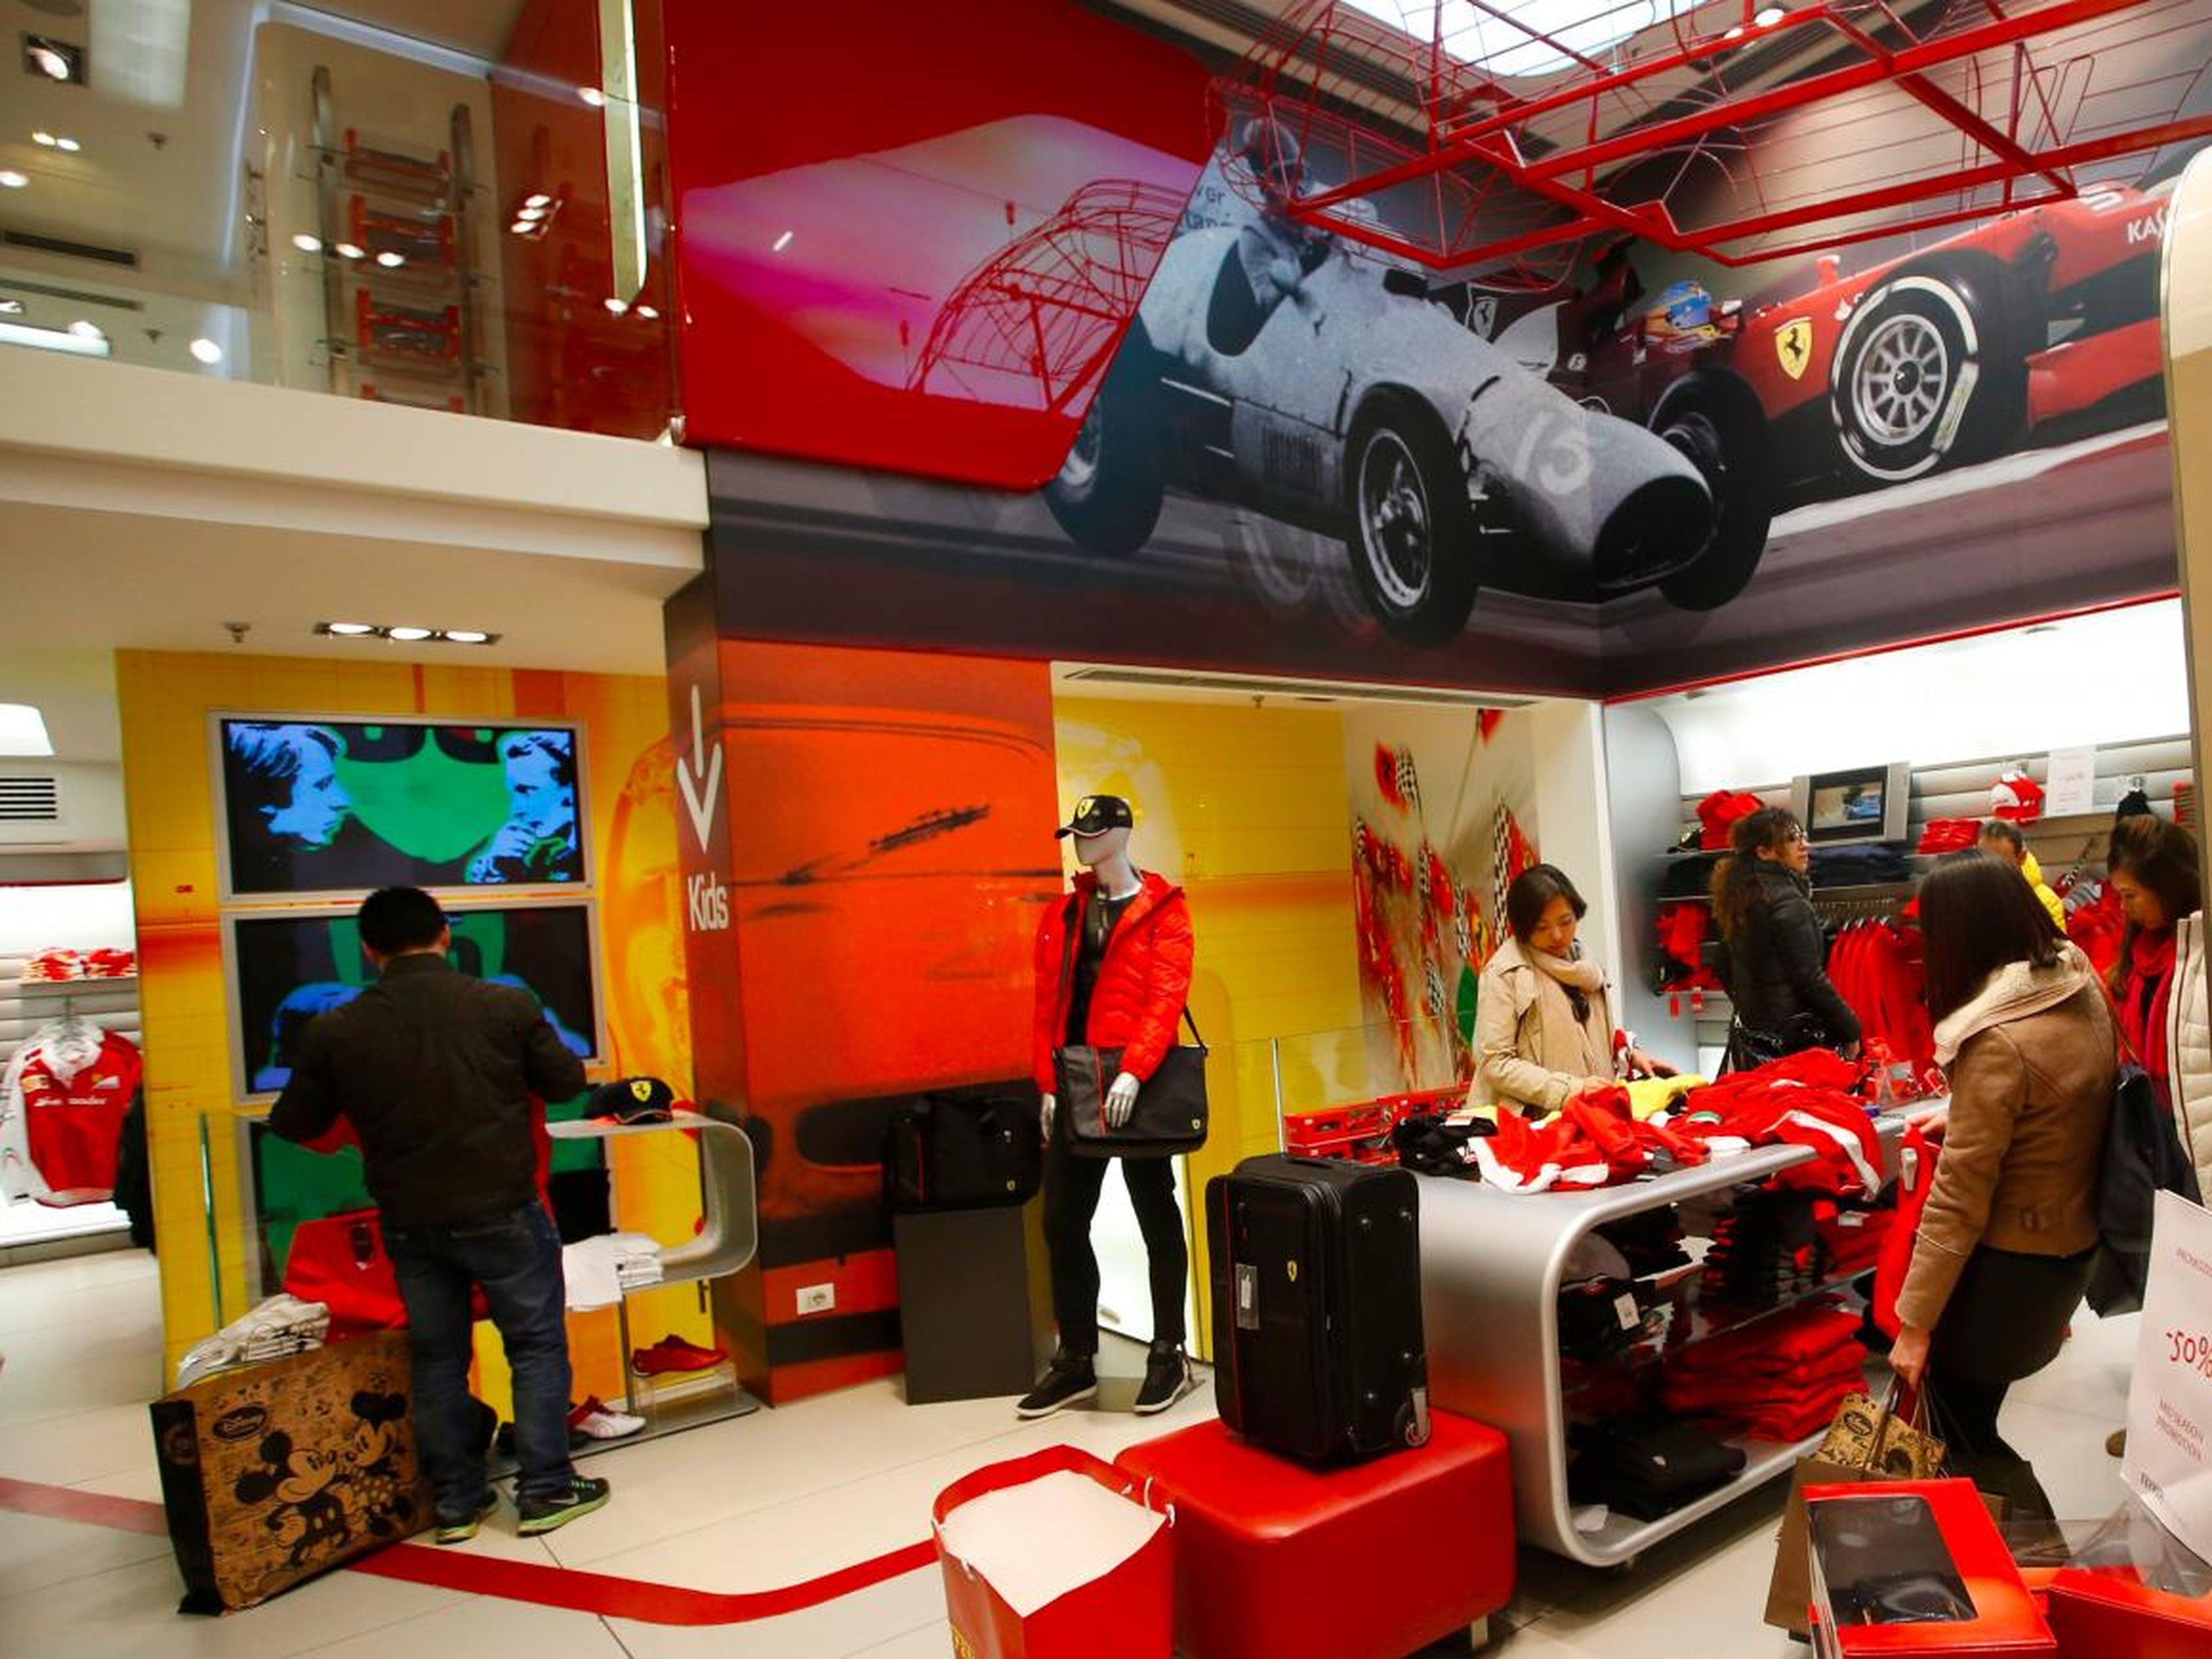 Ferrari also licenses everything from clothes to jewelry.